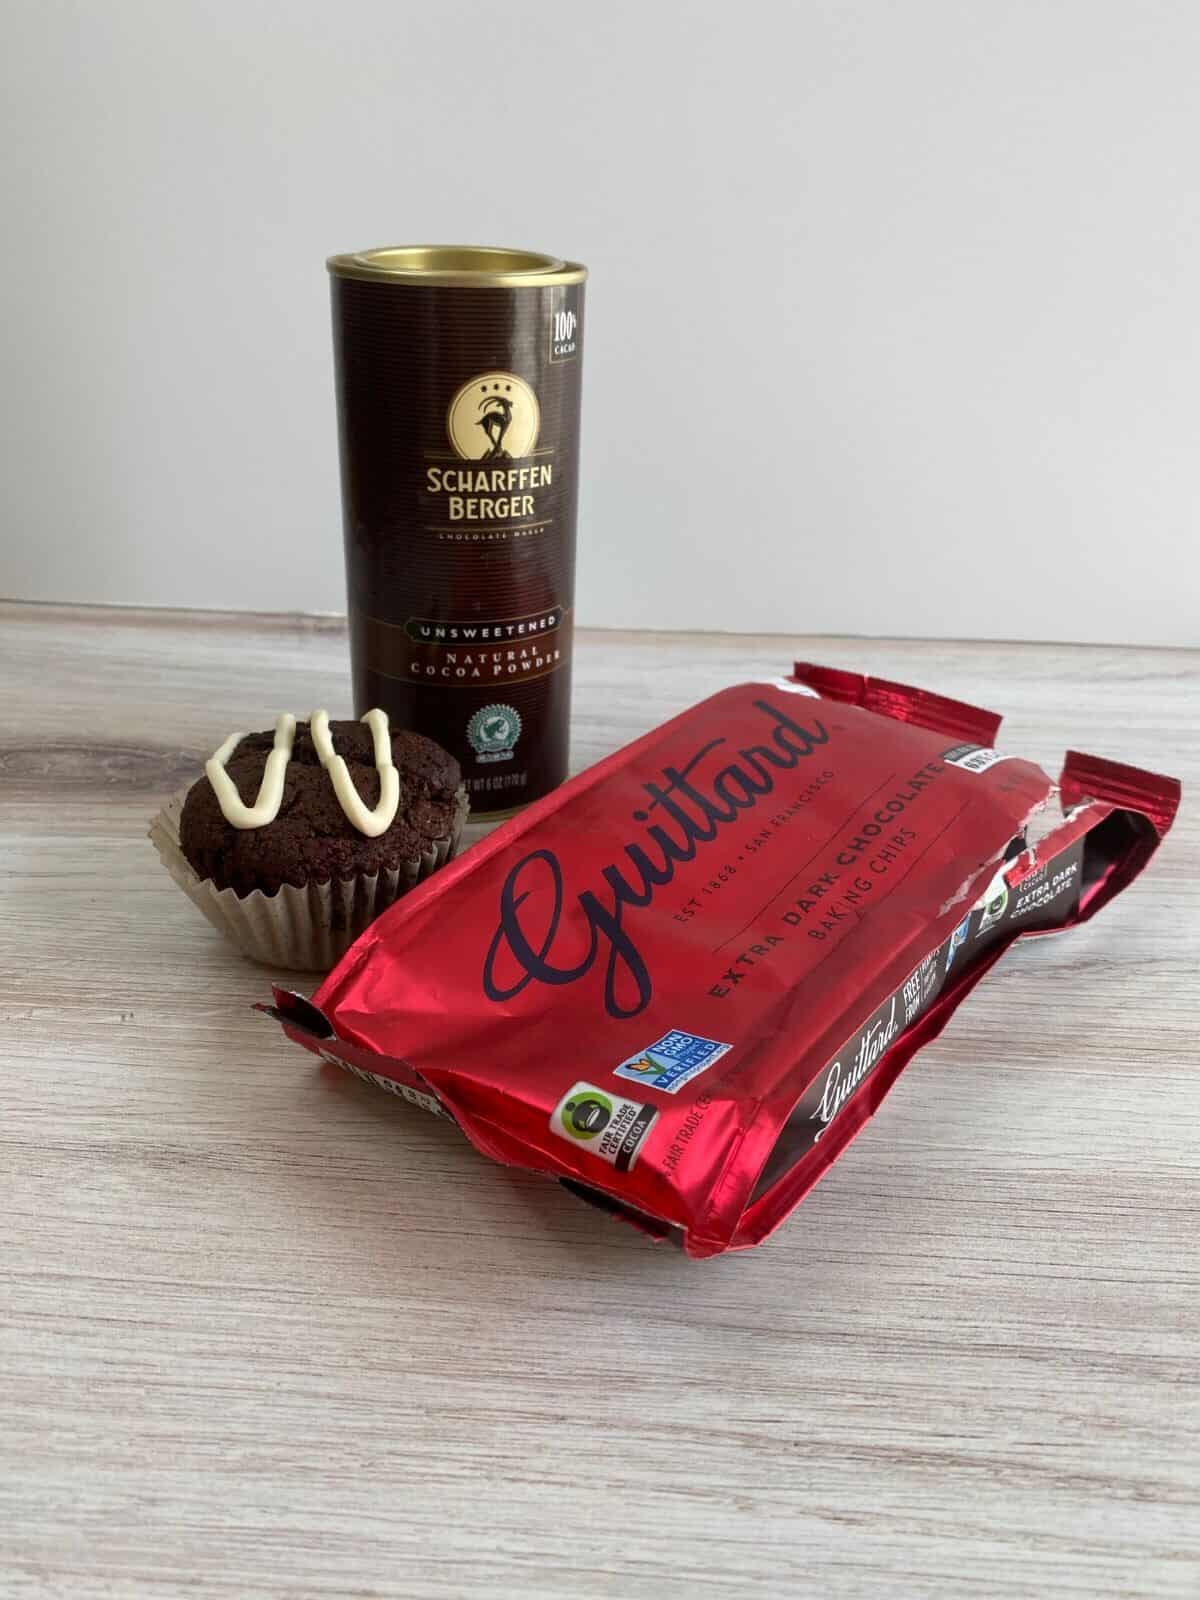 Red Guittard dark baking chip wrapper, chocolate muffin with white drizzle, Scharffen Berger cocoa tin on light wood grain surface